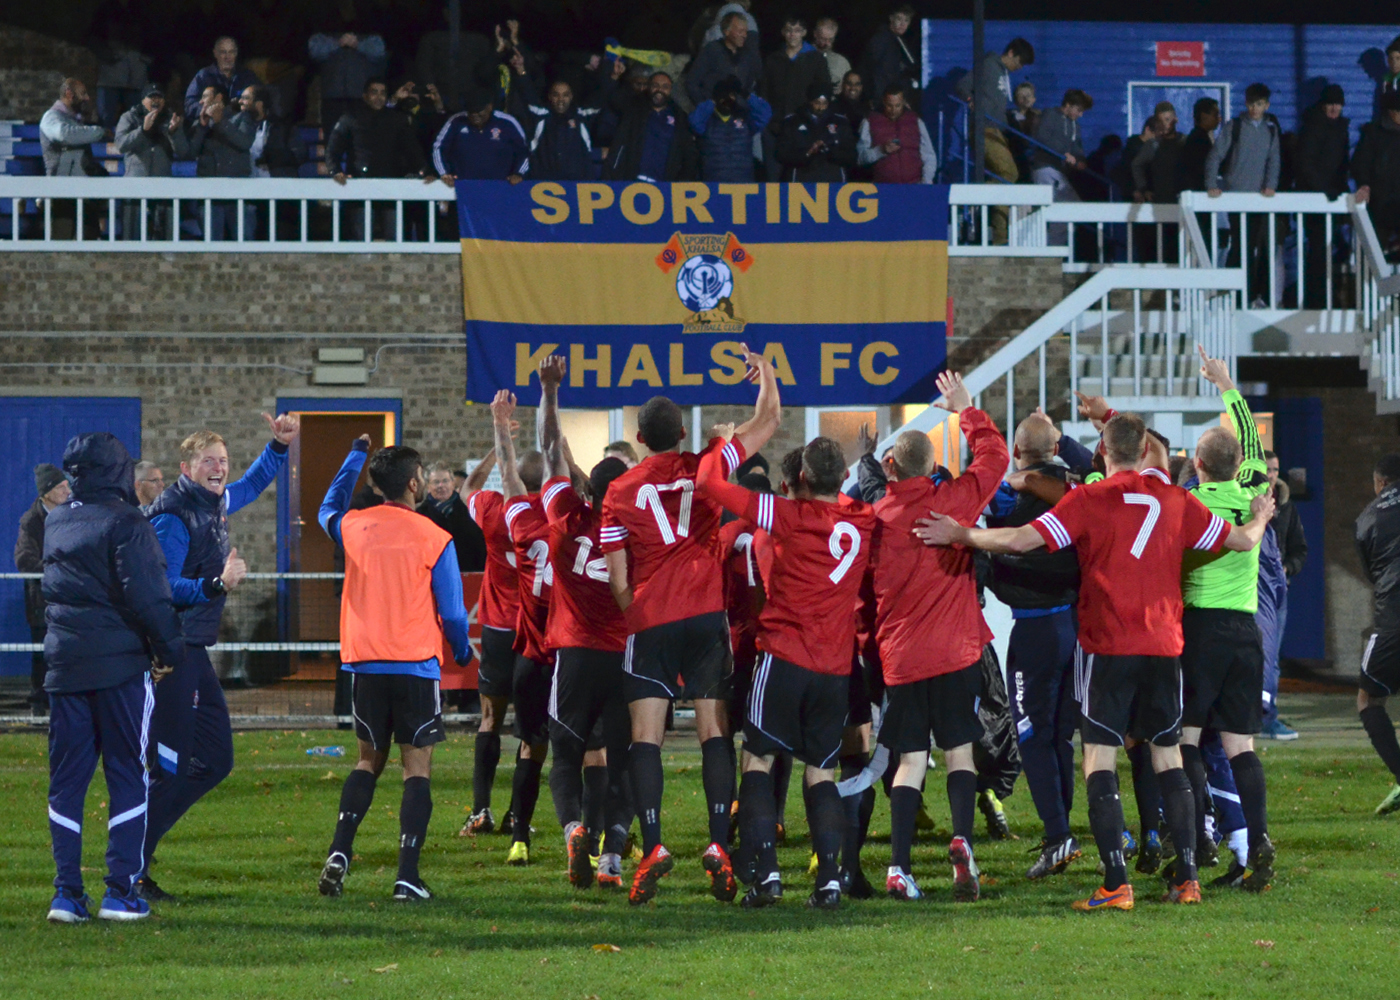 NOT SO SWEET FA: Sporting Khalsa celebrate their famous win at Spalding. Photo by JAKE WHITELEY